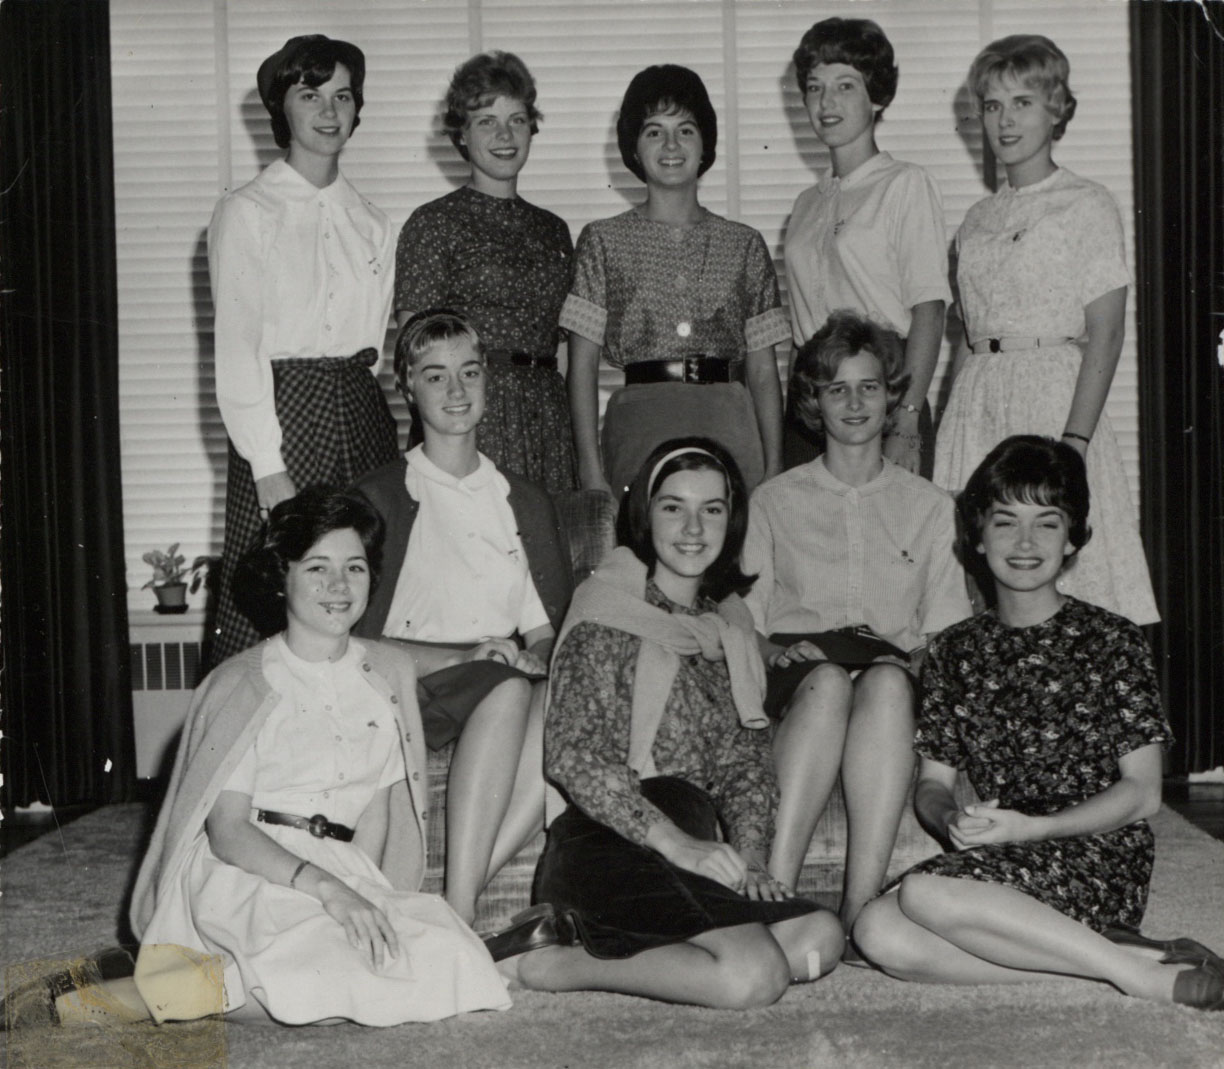 Homecoming queen candidates, 1962 | Dickinson College